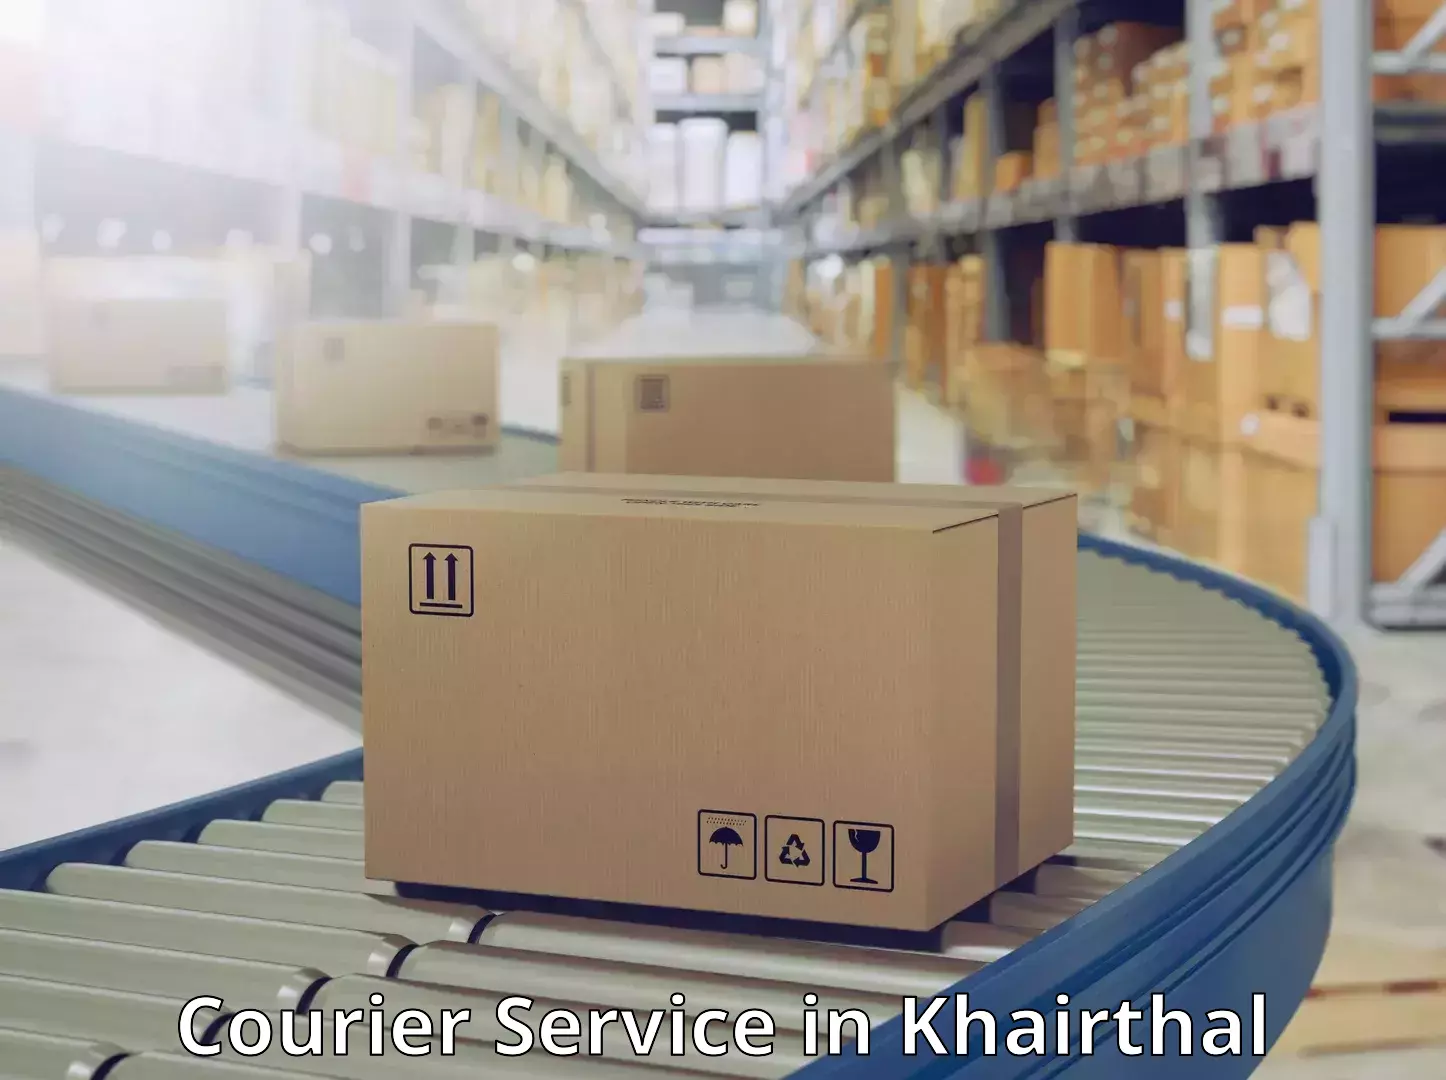 Innovative logistics solutions in Khairthal